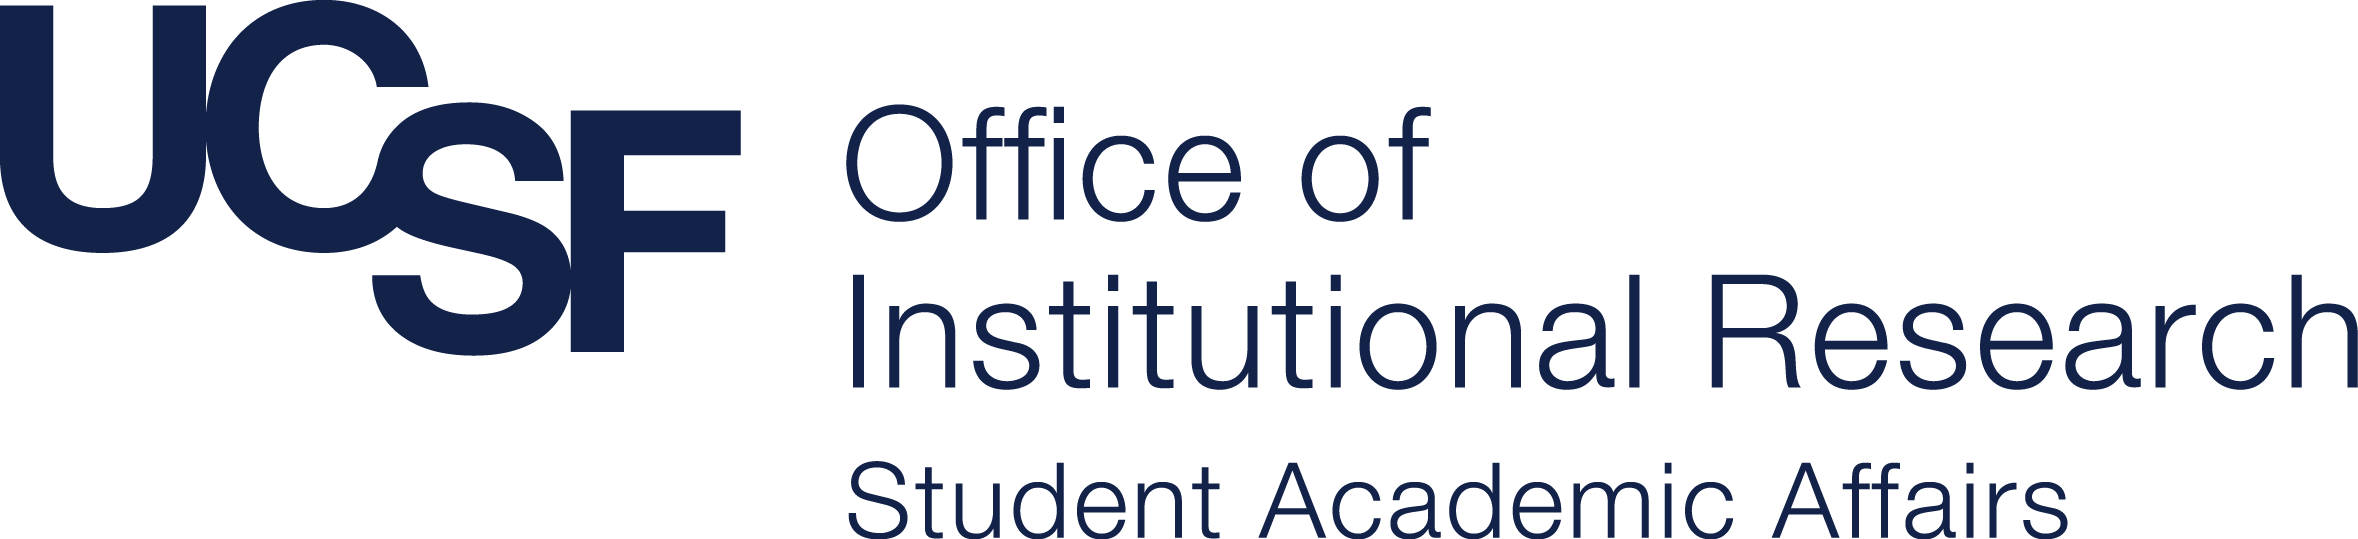 Student Admissions OIR UCSF